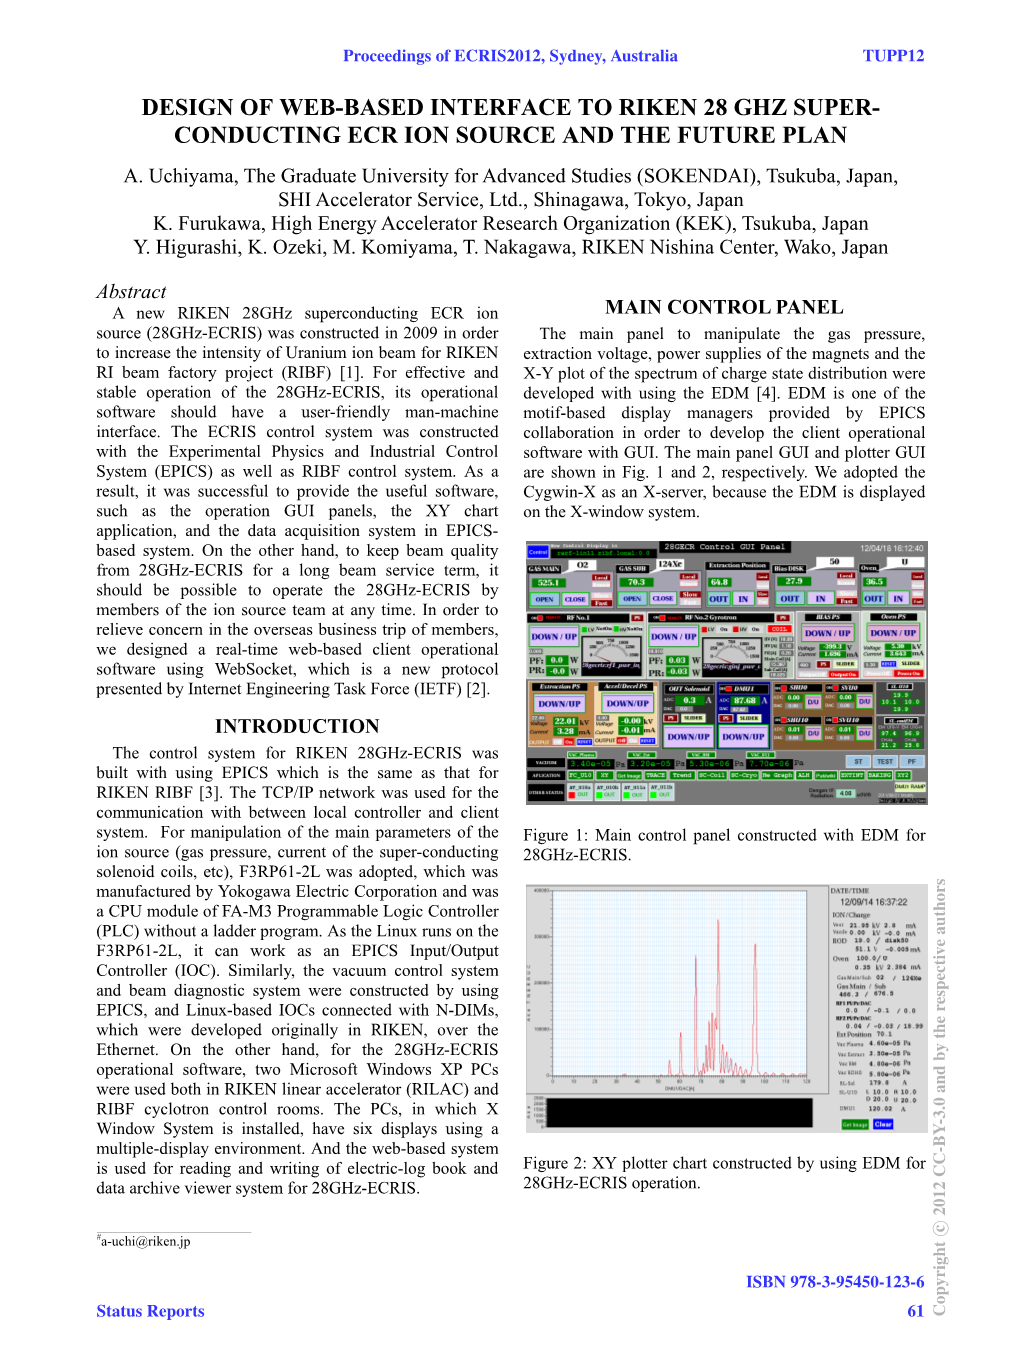 Design of Web-Based Interface to RIKEN 28 Ghz Super-Conducting